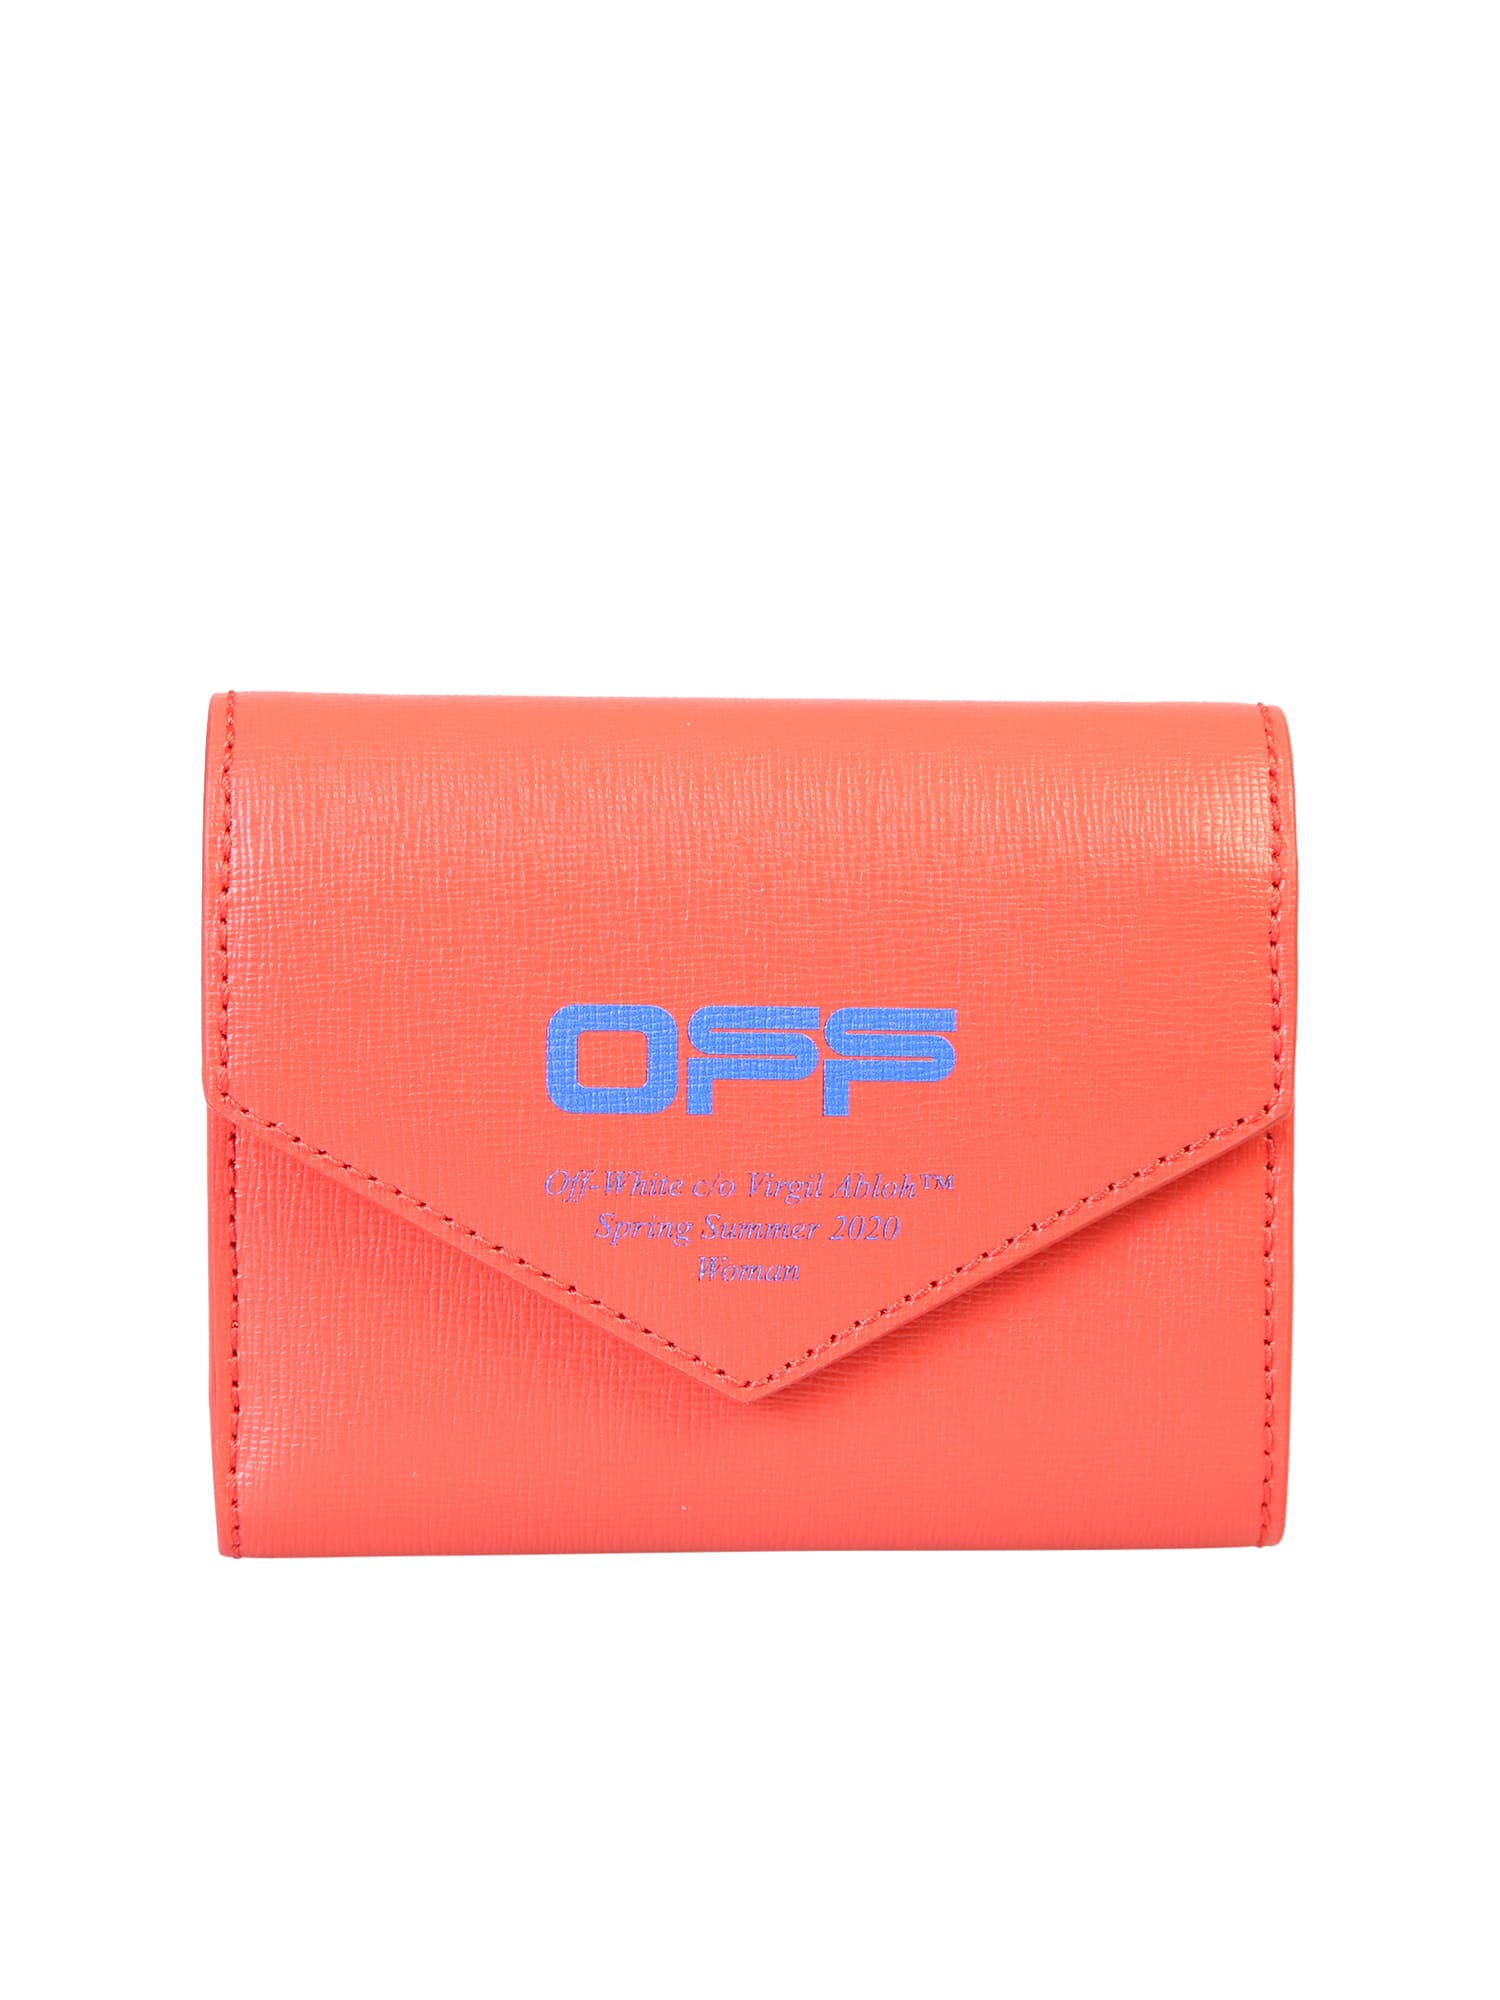 OFF-WHITE PRINTED WALLET,11220391